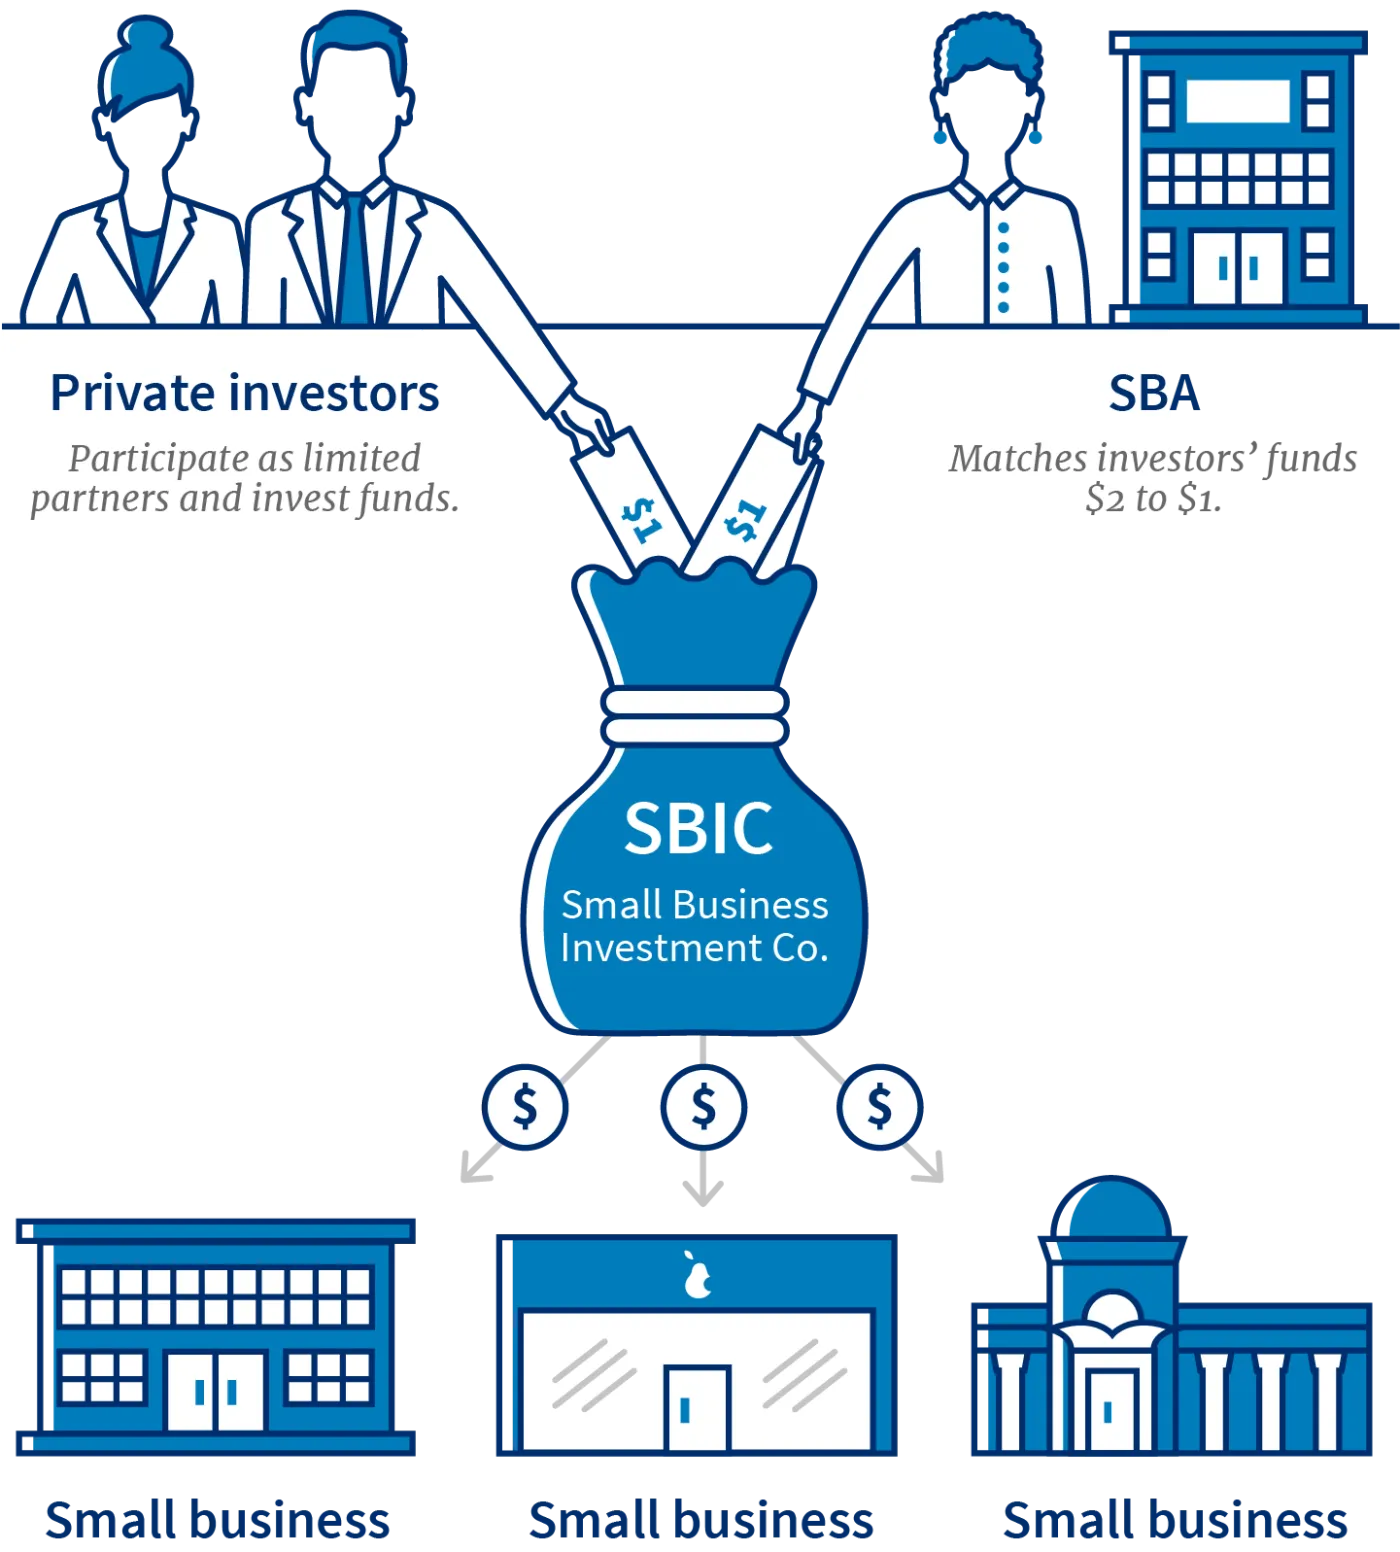 An infographic showing how private investors contribute funds to a Small Business Investment Company. The SBA matches funds $2 to $1, and the SBIC then distributes funds to small businesses in the form of investments.